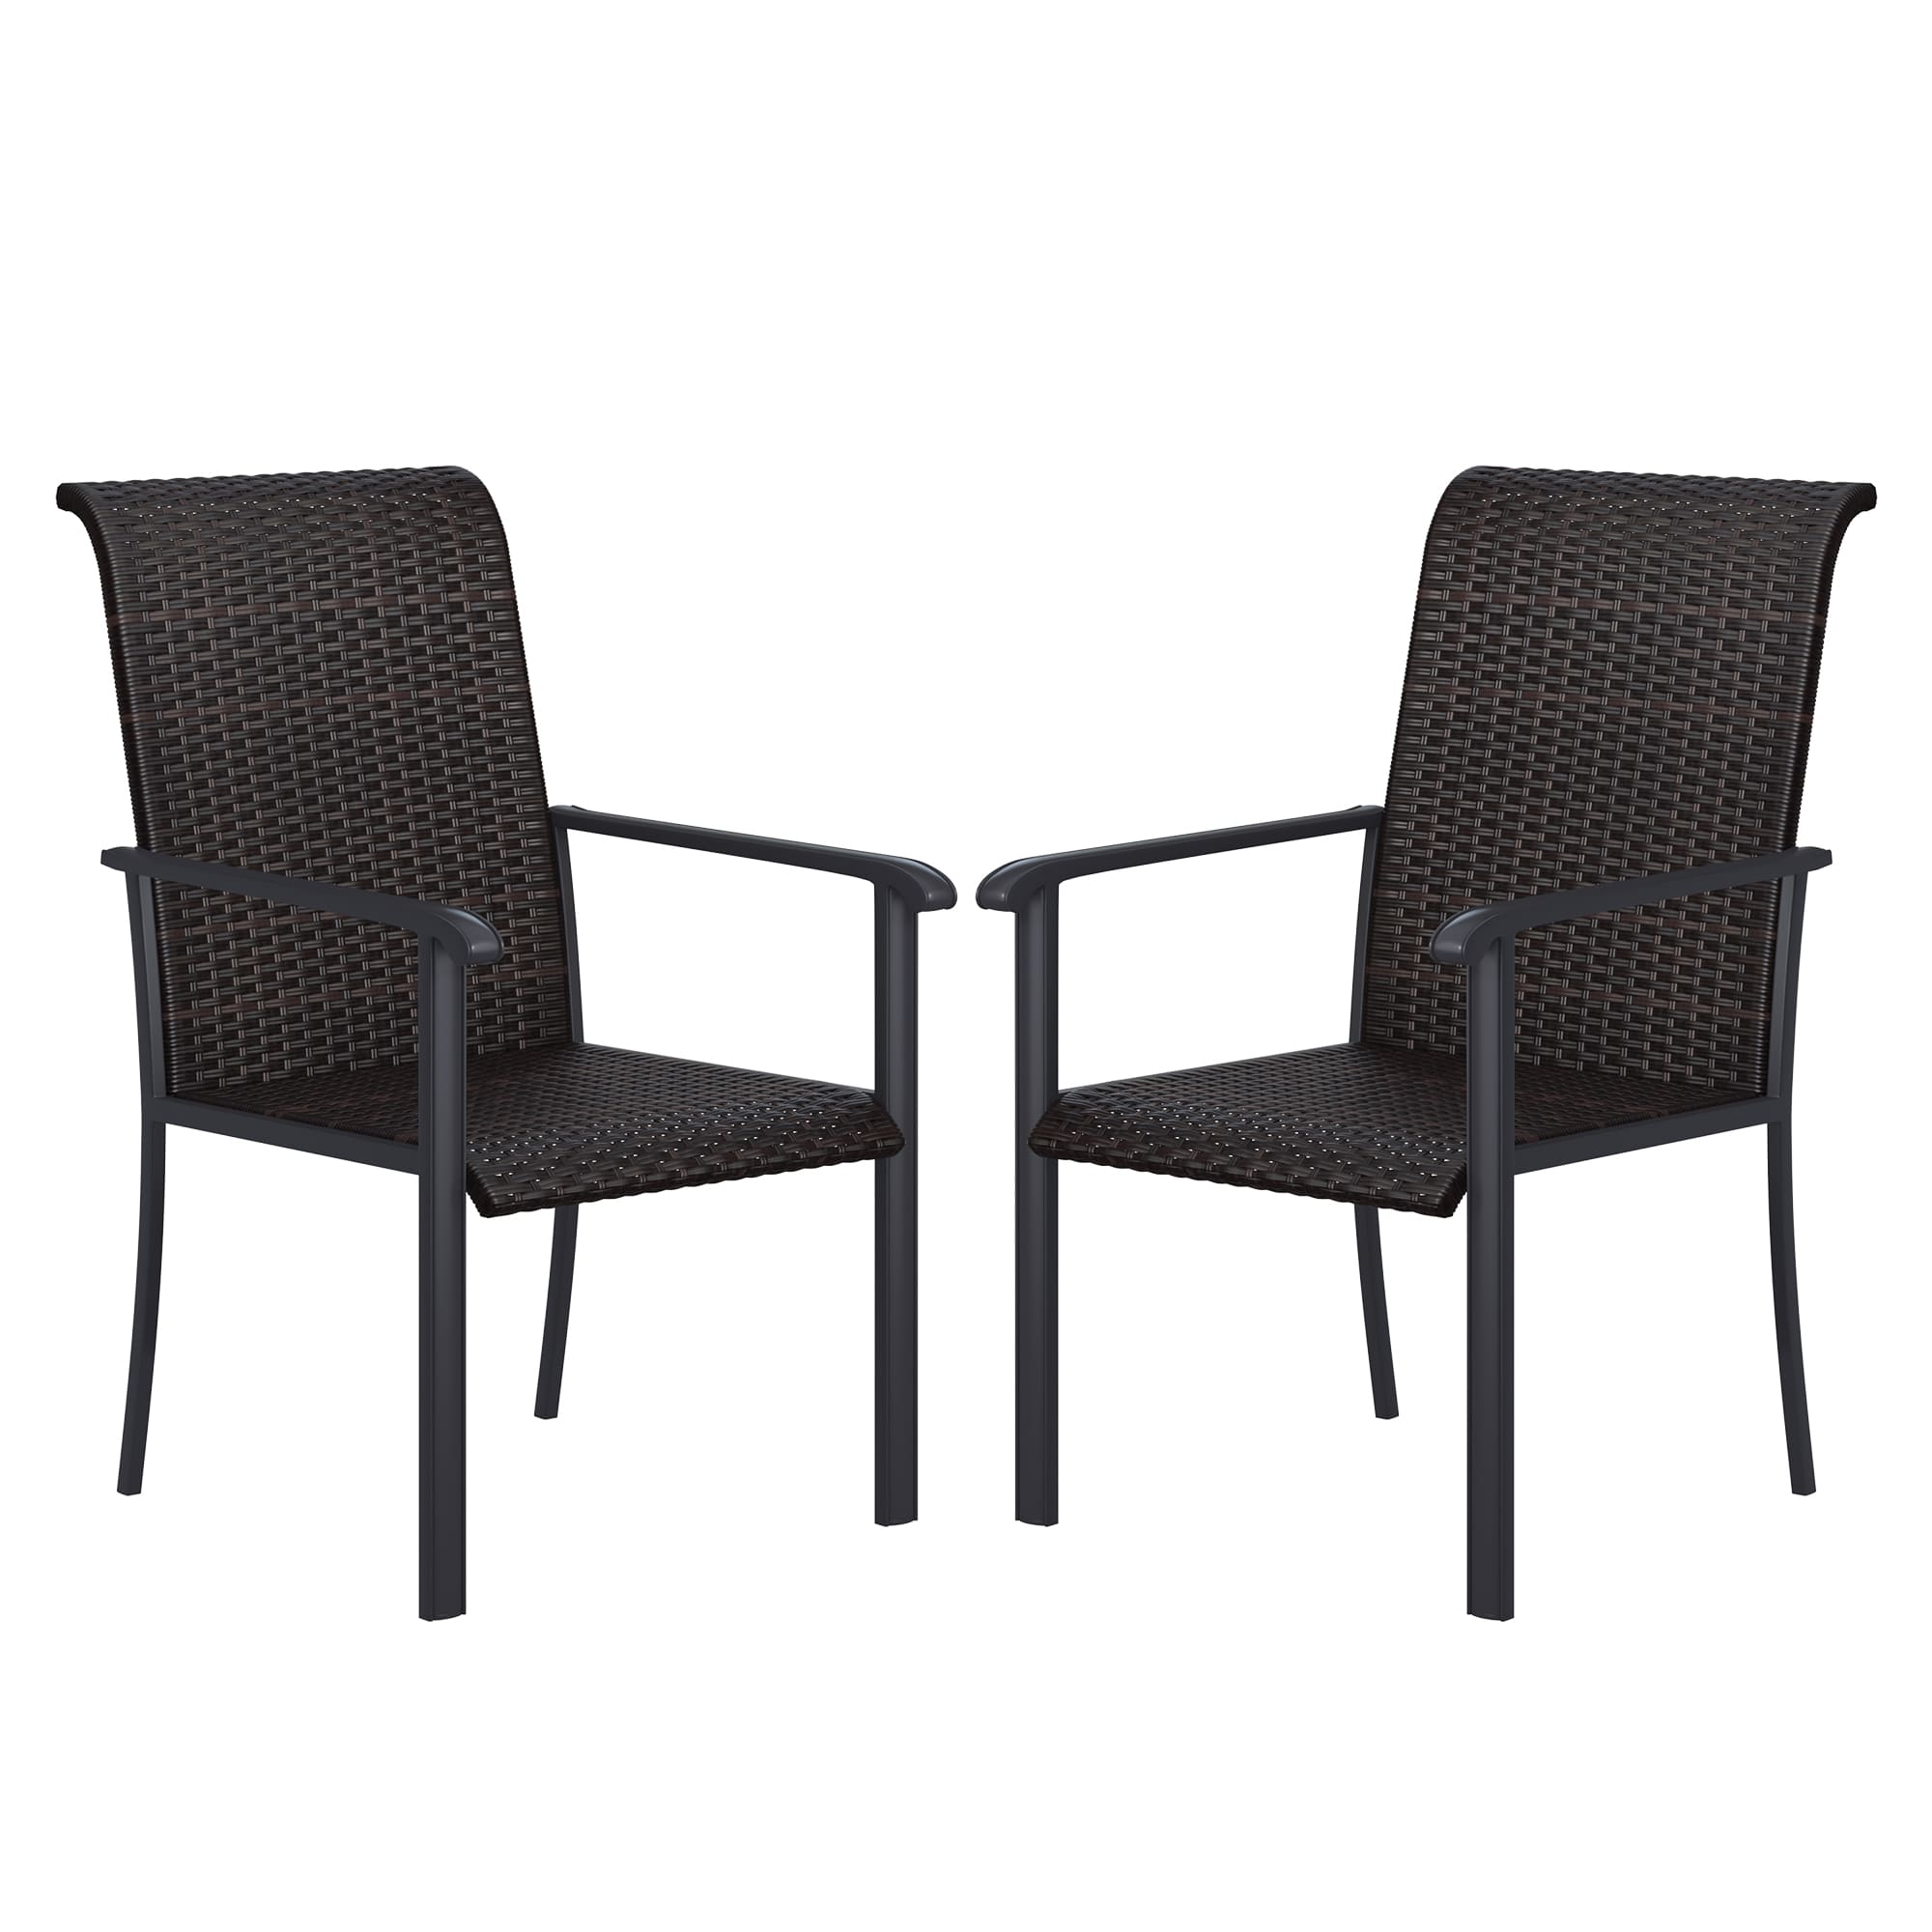 Vicllax Patio Wicker Dining Chairs Set of 2/4/6, Outdoor Dining Chairs with Armrests